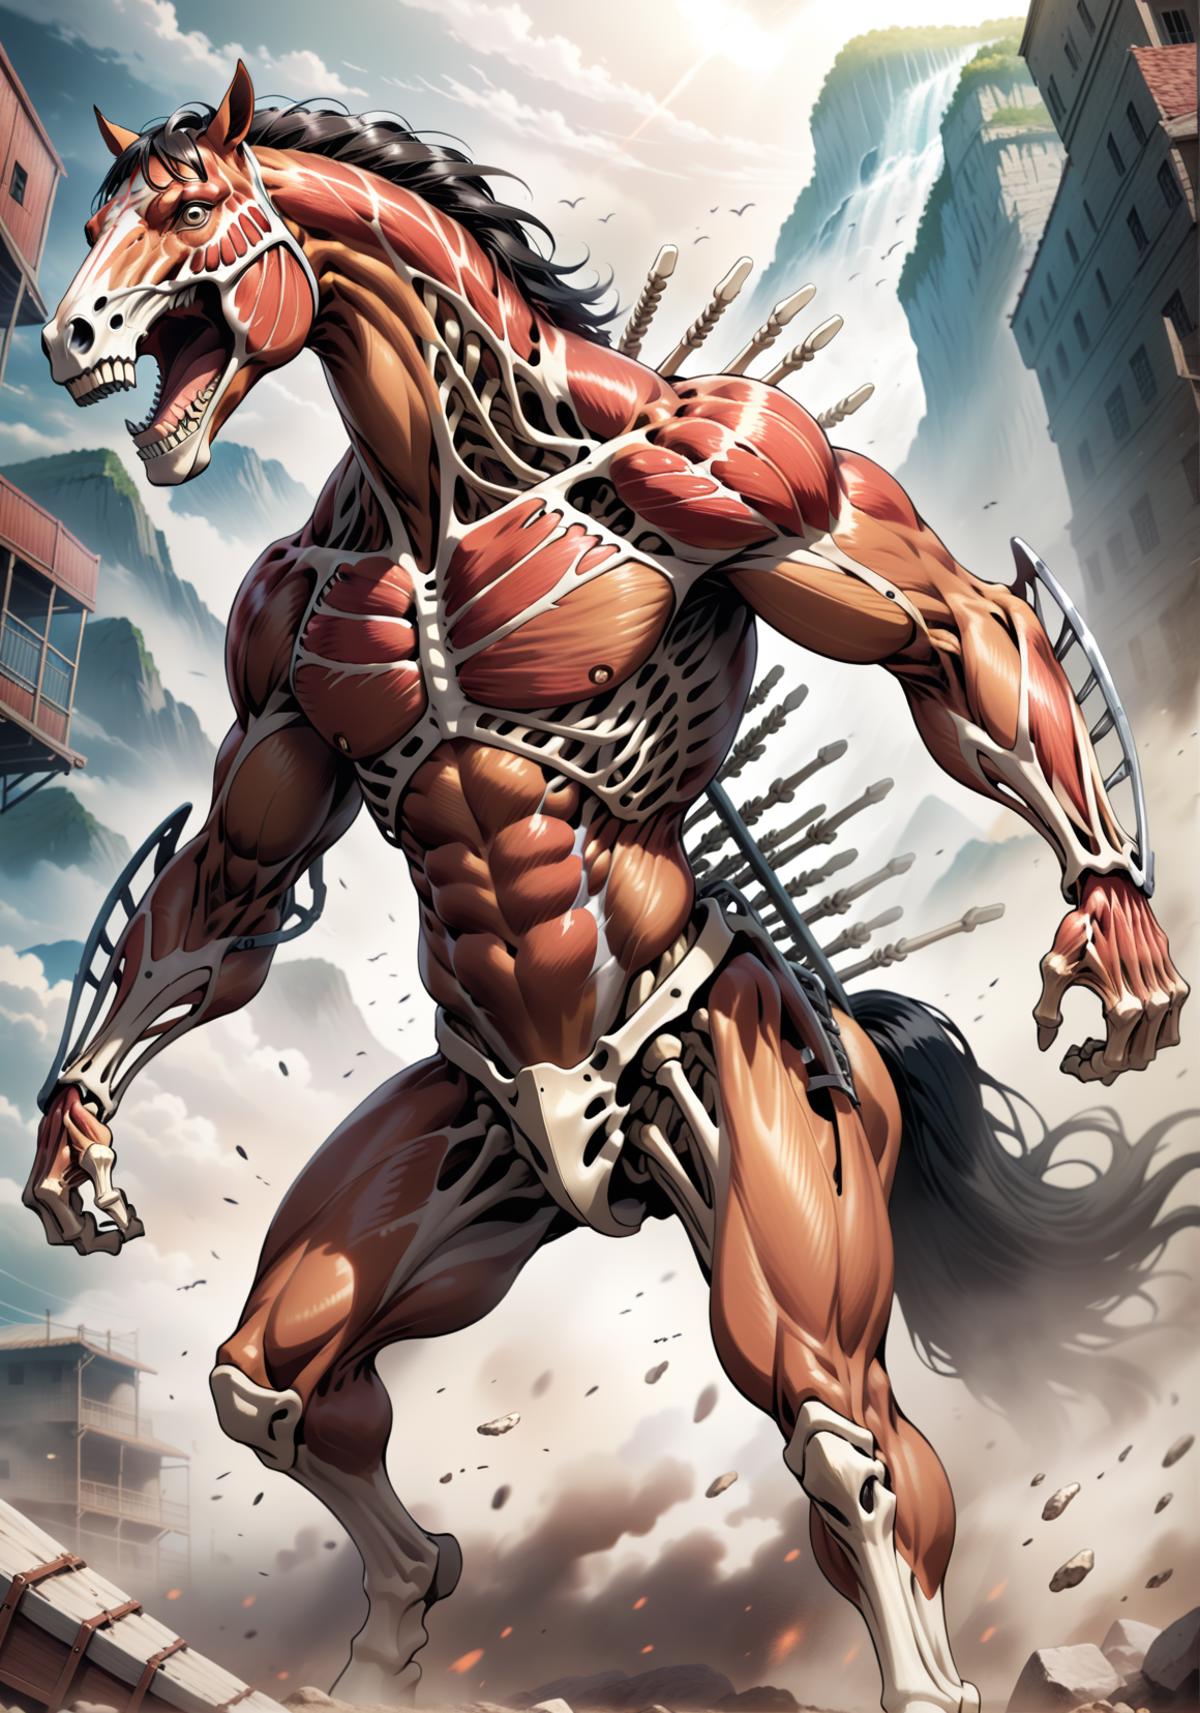 Muscular Horse with Skeletal Skin and Exposed Ribs in a Cityscape